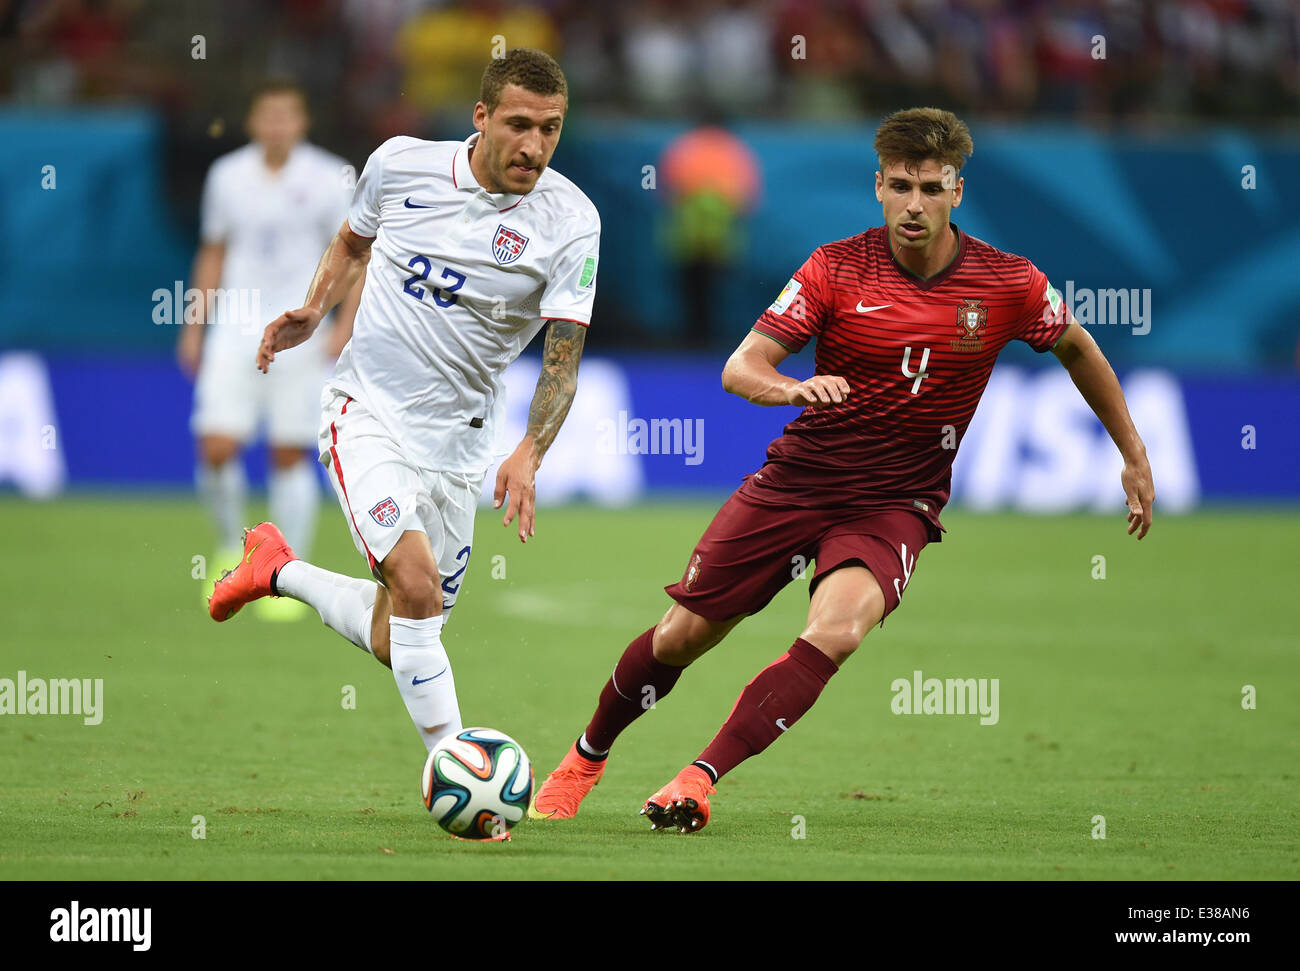 Manaus, Brazil. 22nd June, 2014. Fabian Johnson (L) of USA in action against Miguel Veloso of Portugal during the FIFA World Cup 2014 group G preliminary round match between the USA and Portugal at the Arena Amazonia Stadium in Manaus, Brazil, 22 June 2014. Photo: Marius Becker/dpa/Alamy Live News Stock Photo